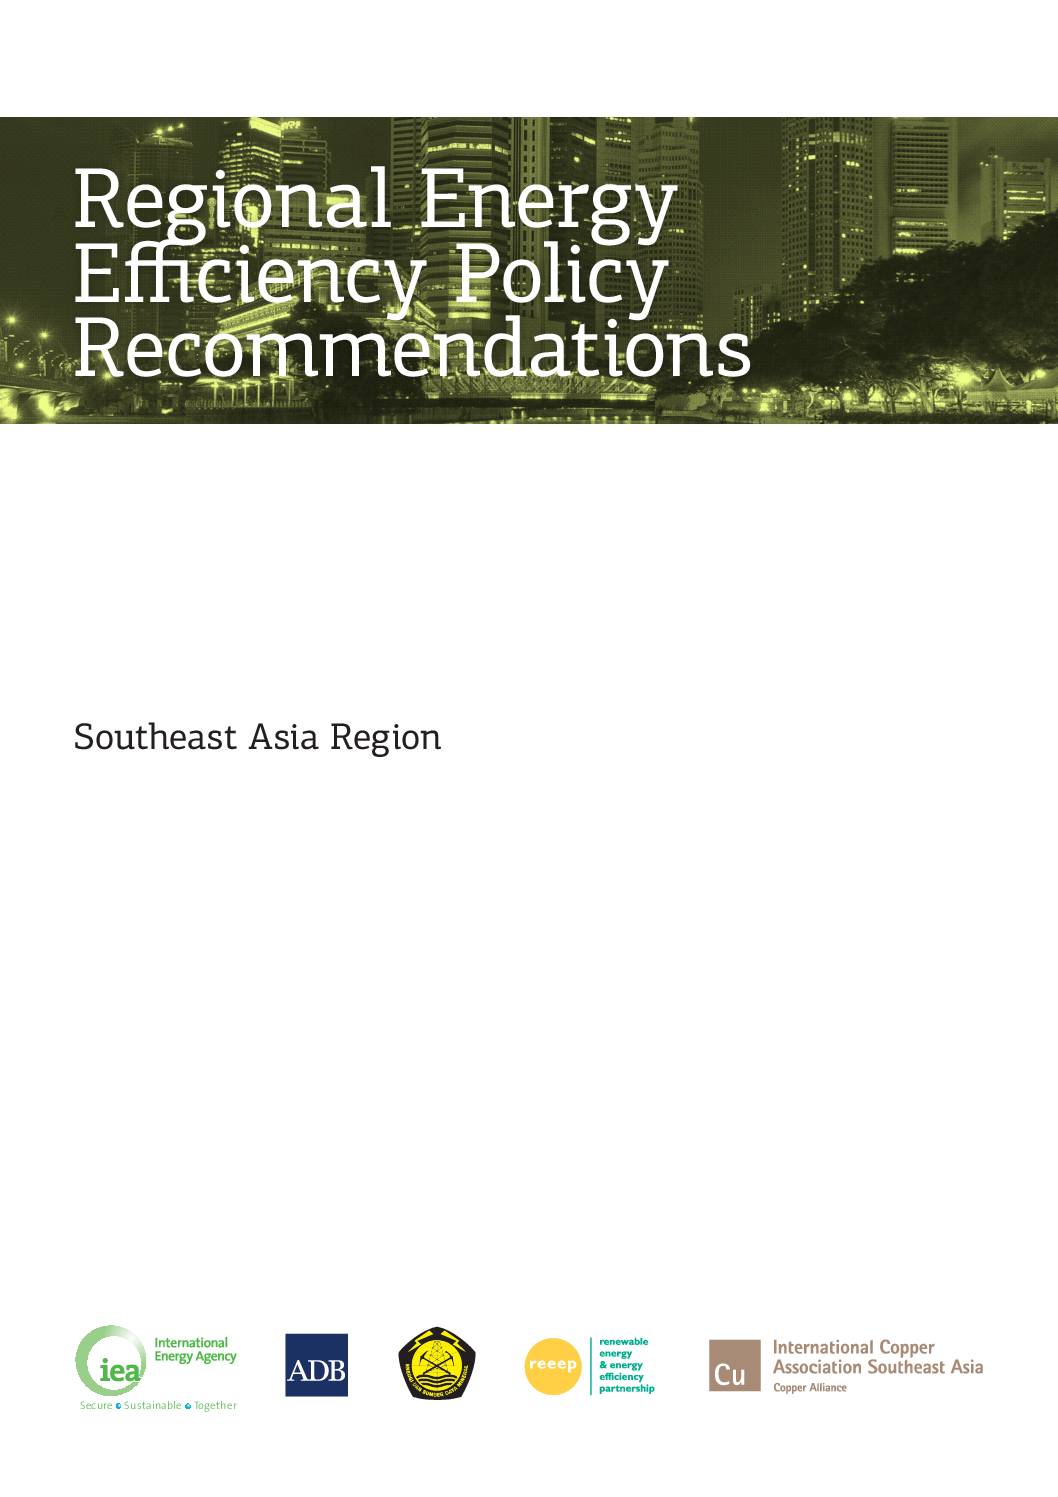 Regional Energy Efficiency Policy Recommendations: Southeast Asia Region